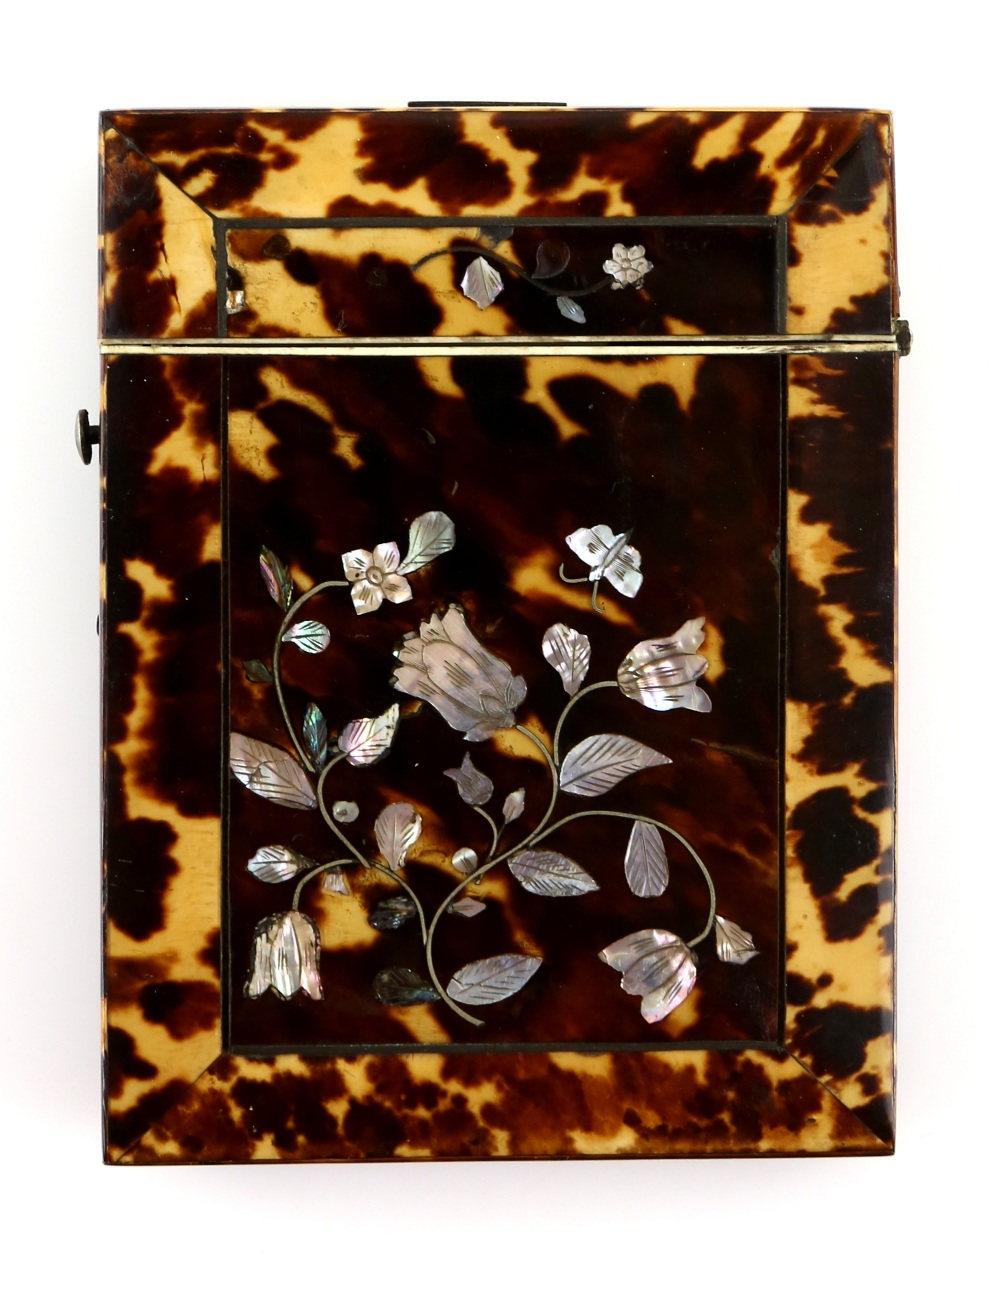 19th century tortoiseshell card case with inlaid silvered decoration of flowers and foliage, 10.5